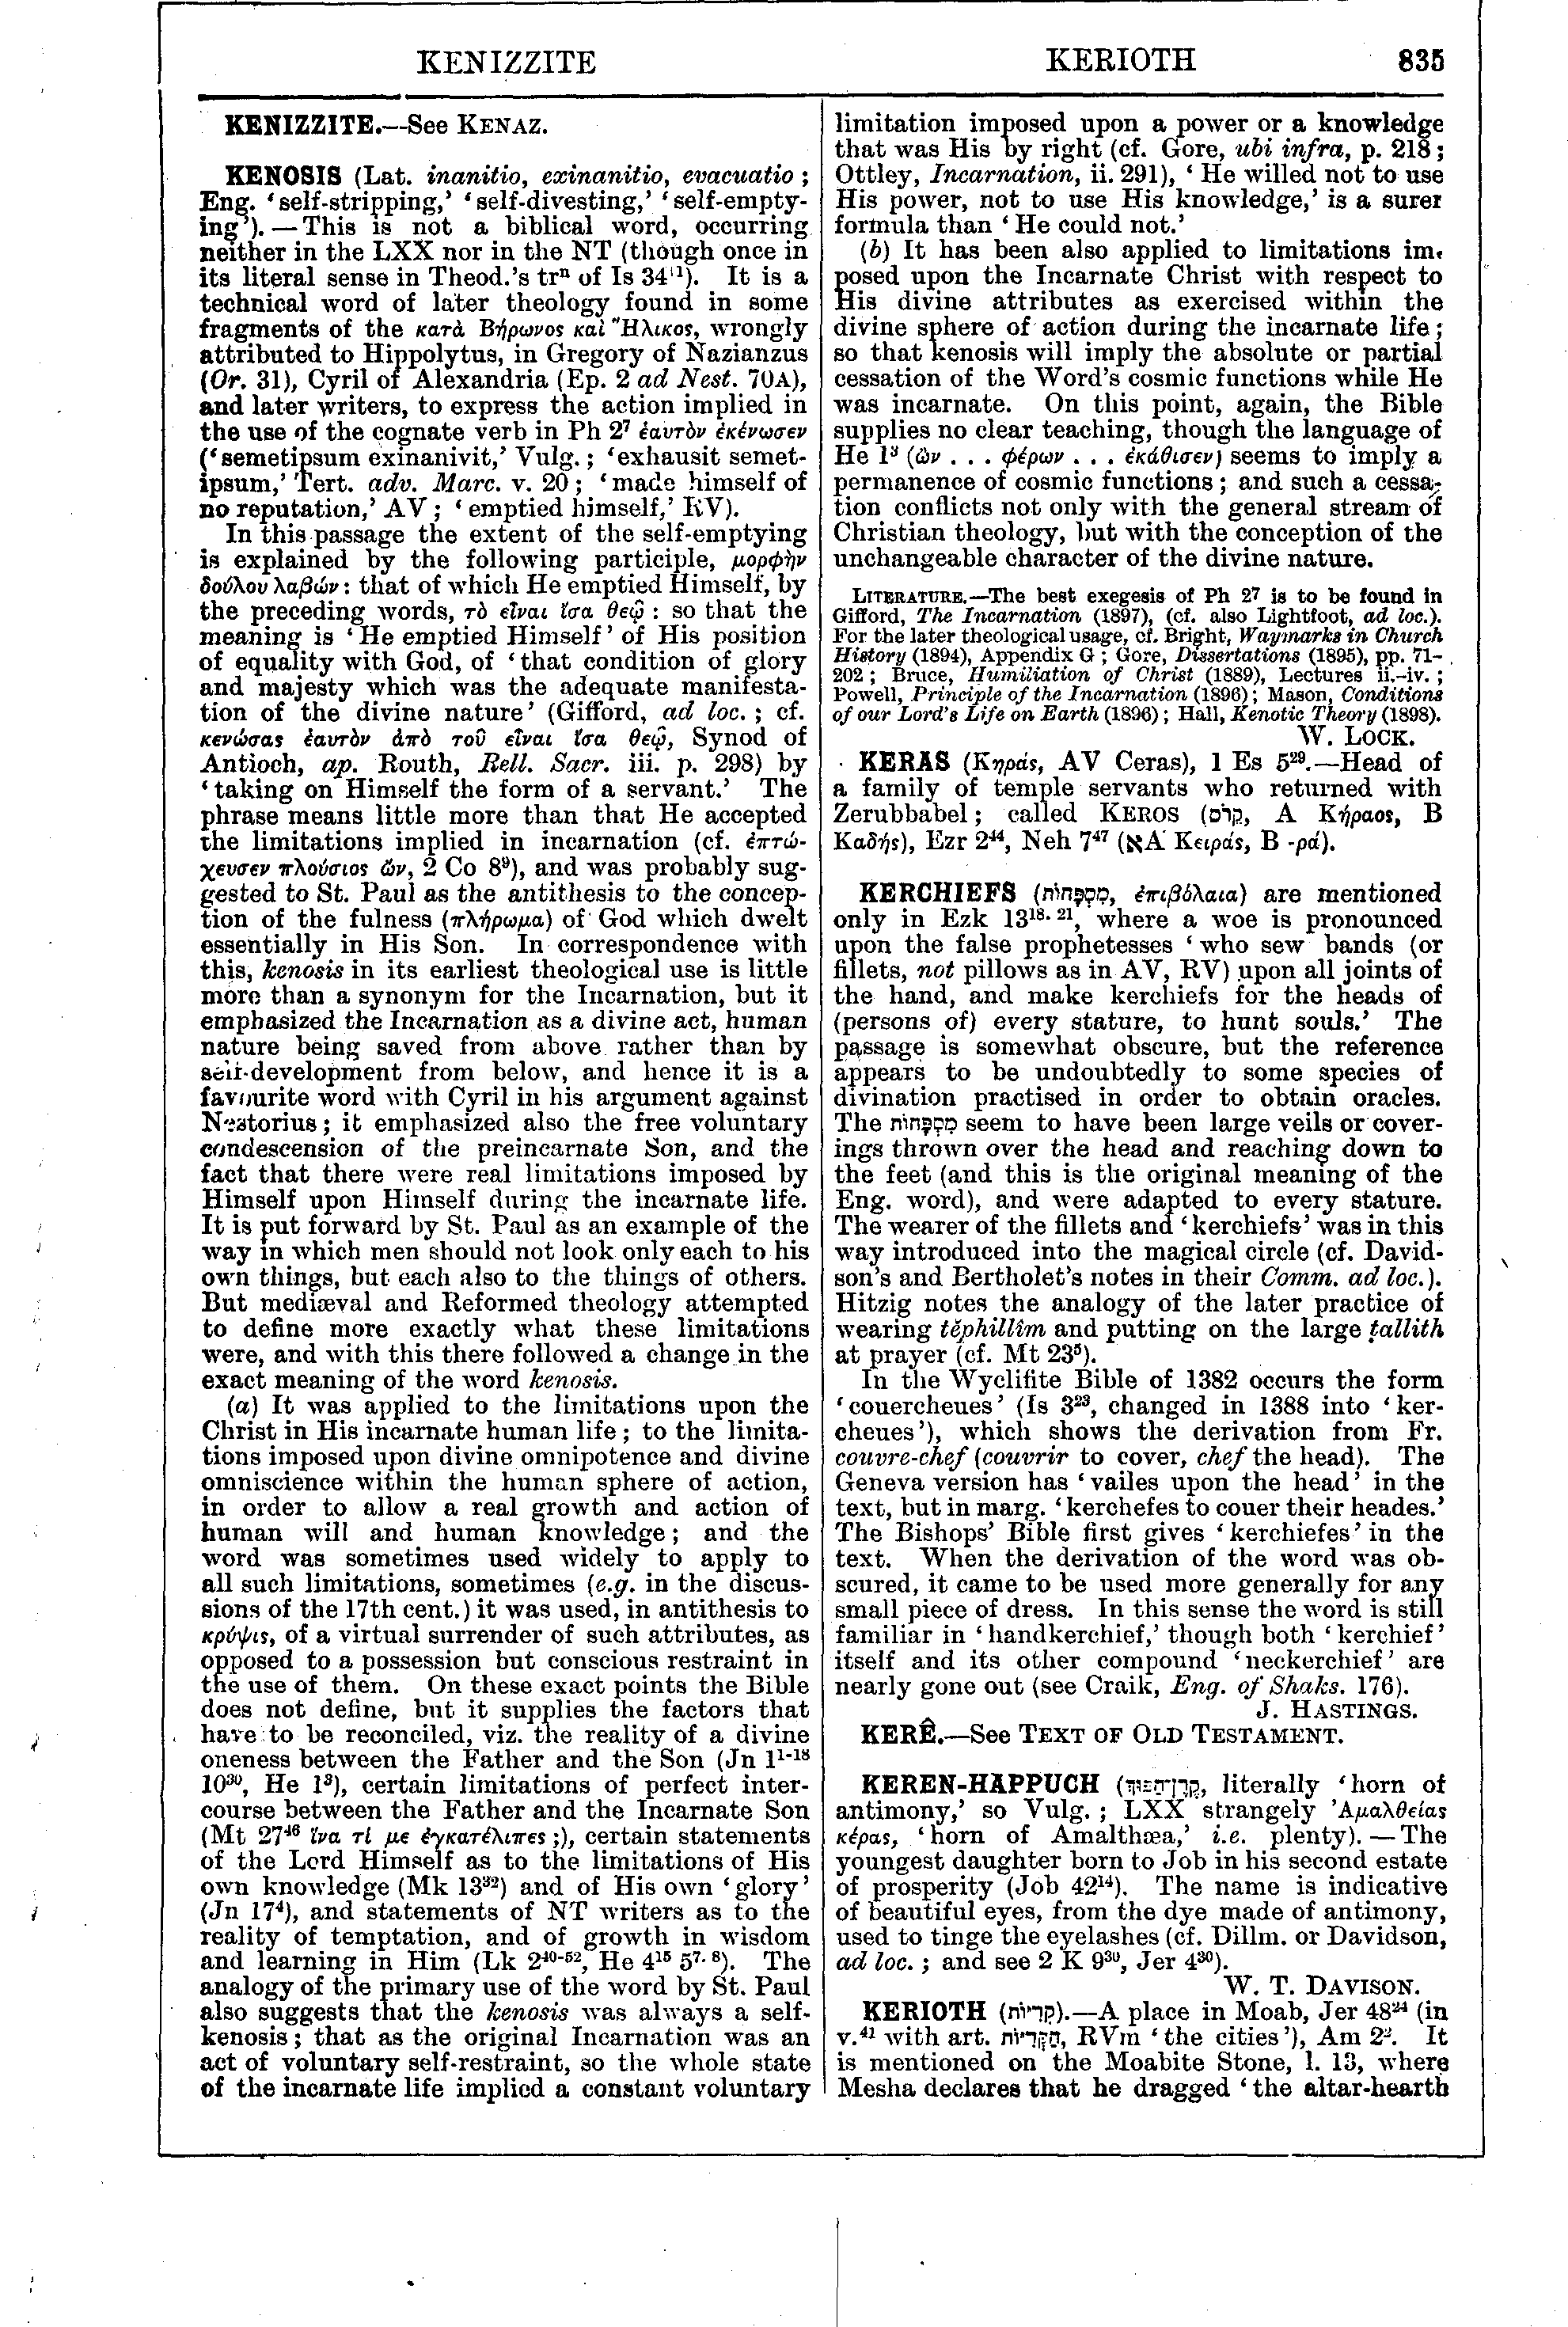 Image of page 835